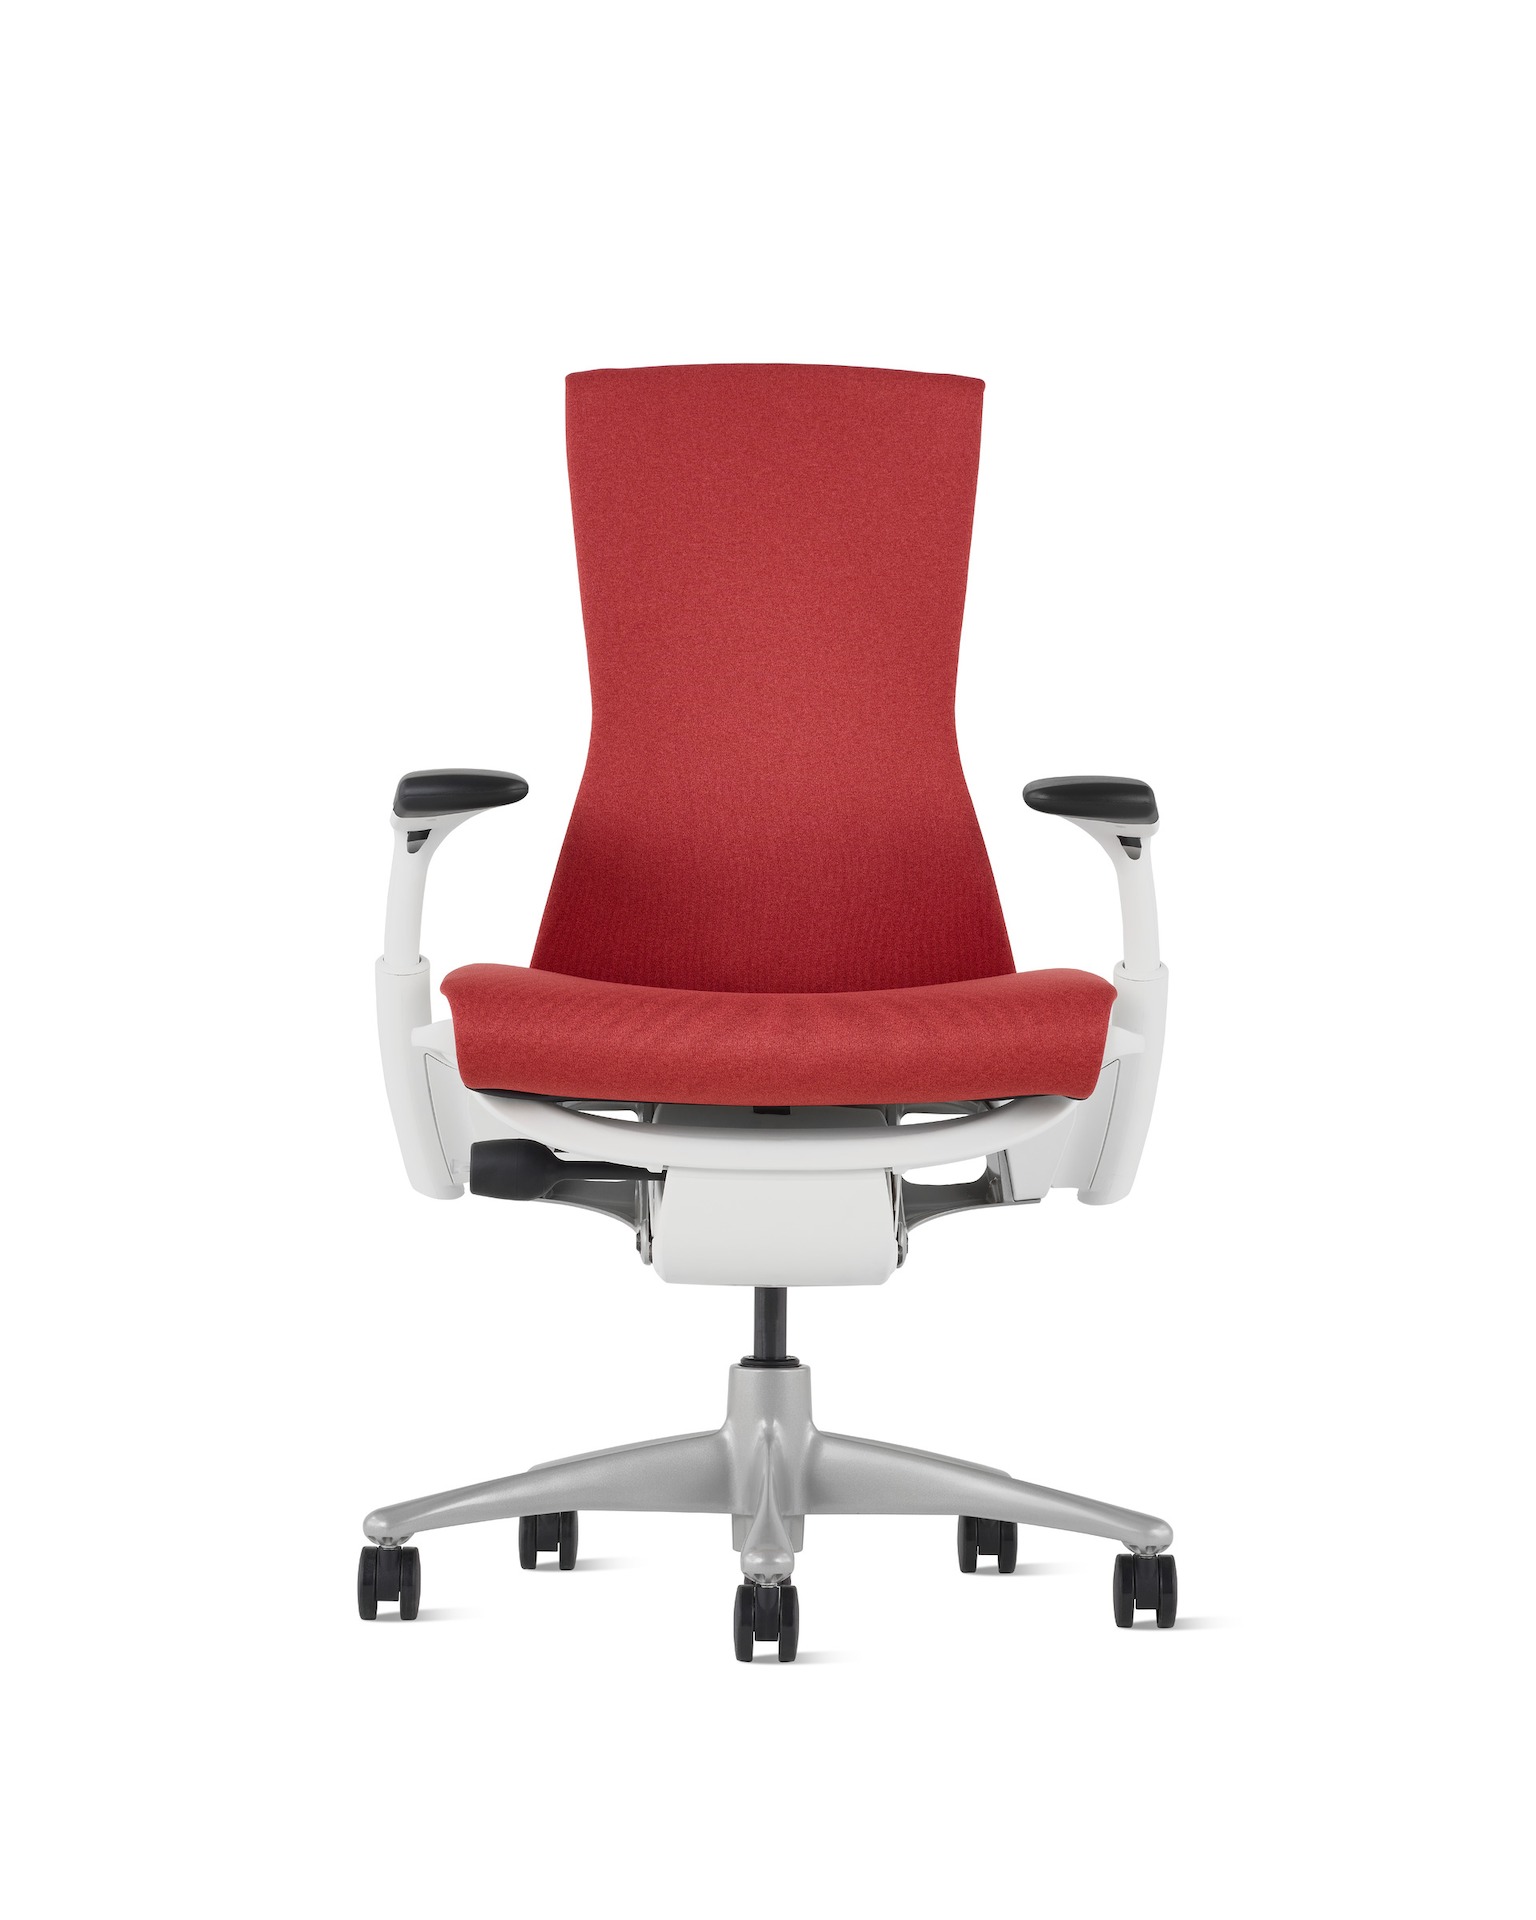 An Embody Chair, light red color, viewed from the front